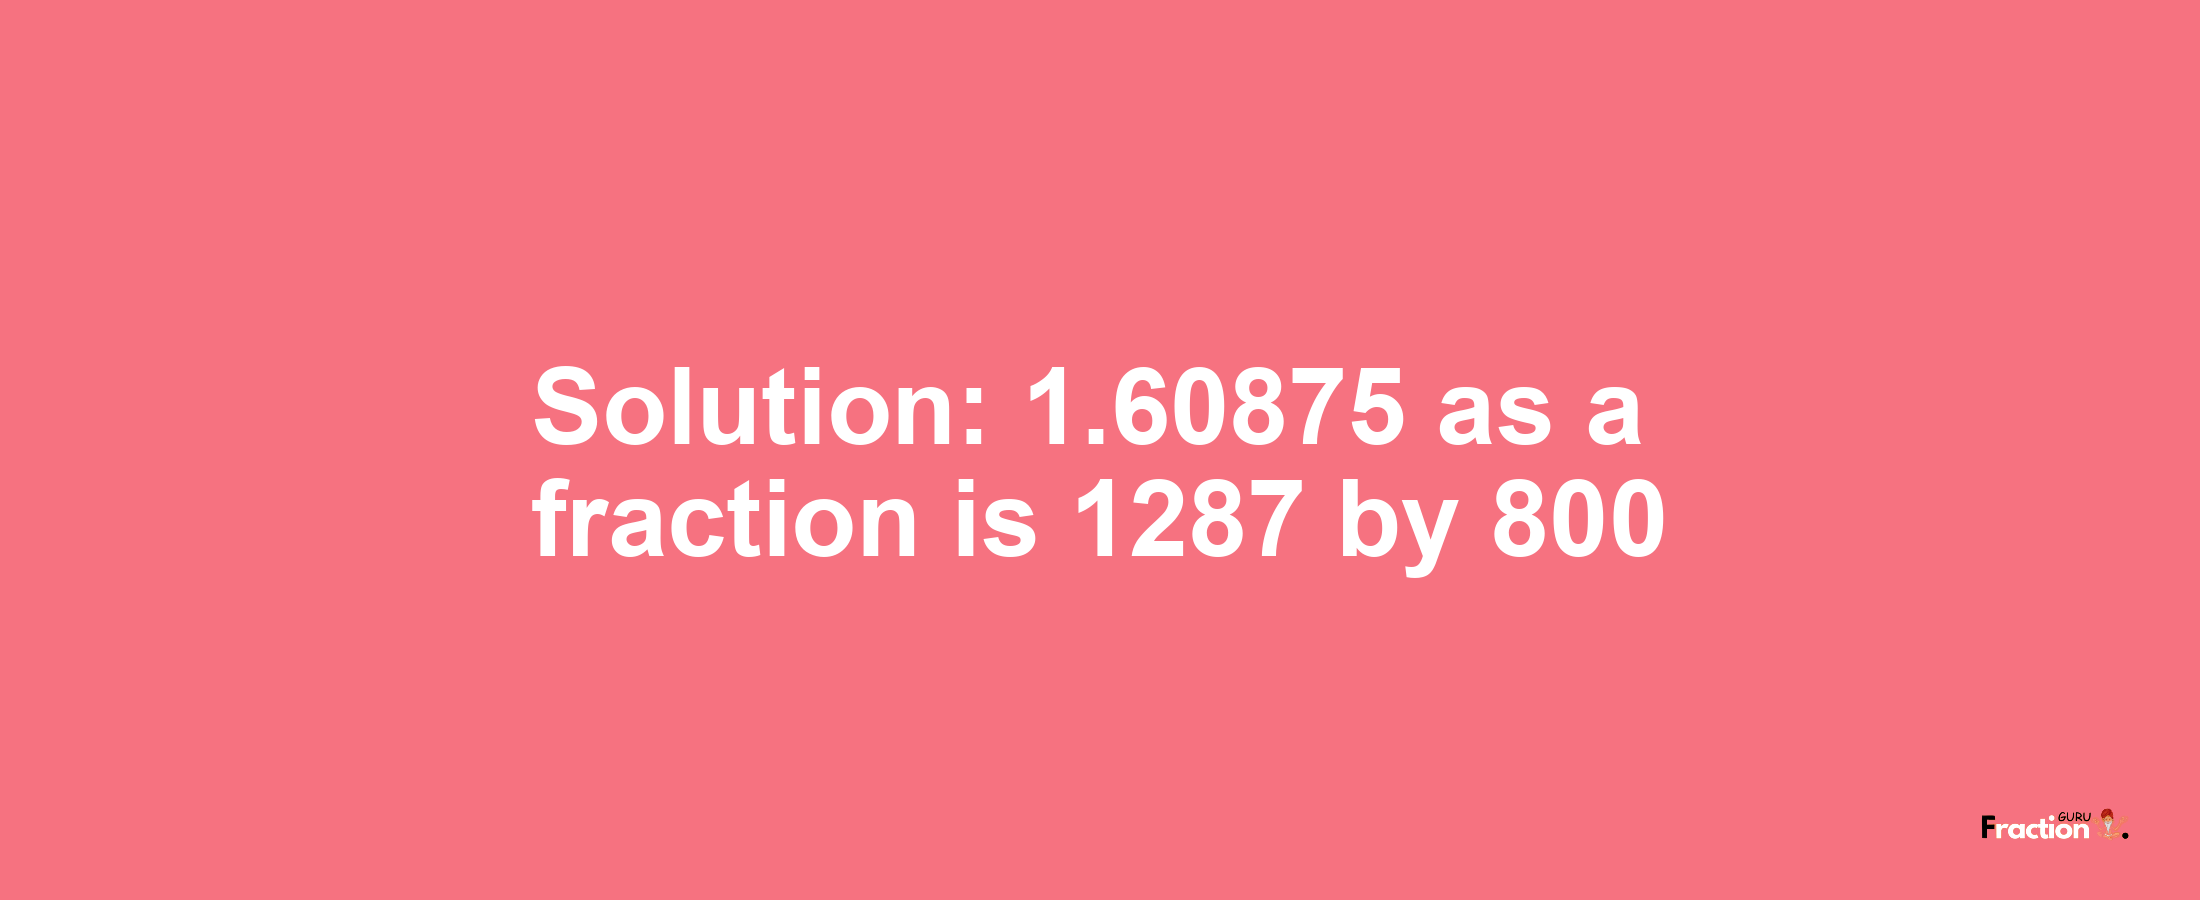 Solution:1.60875 as a fraction is 1287/800